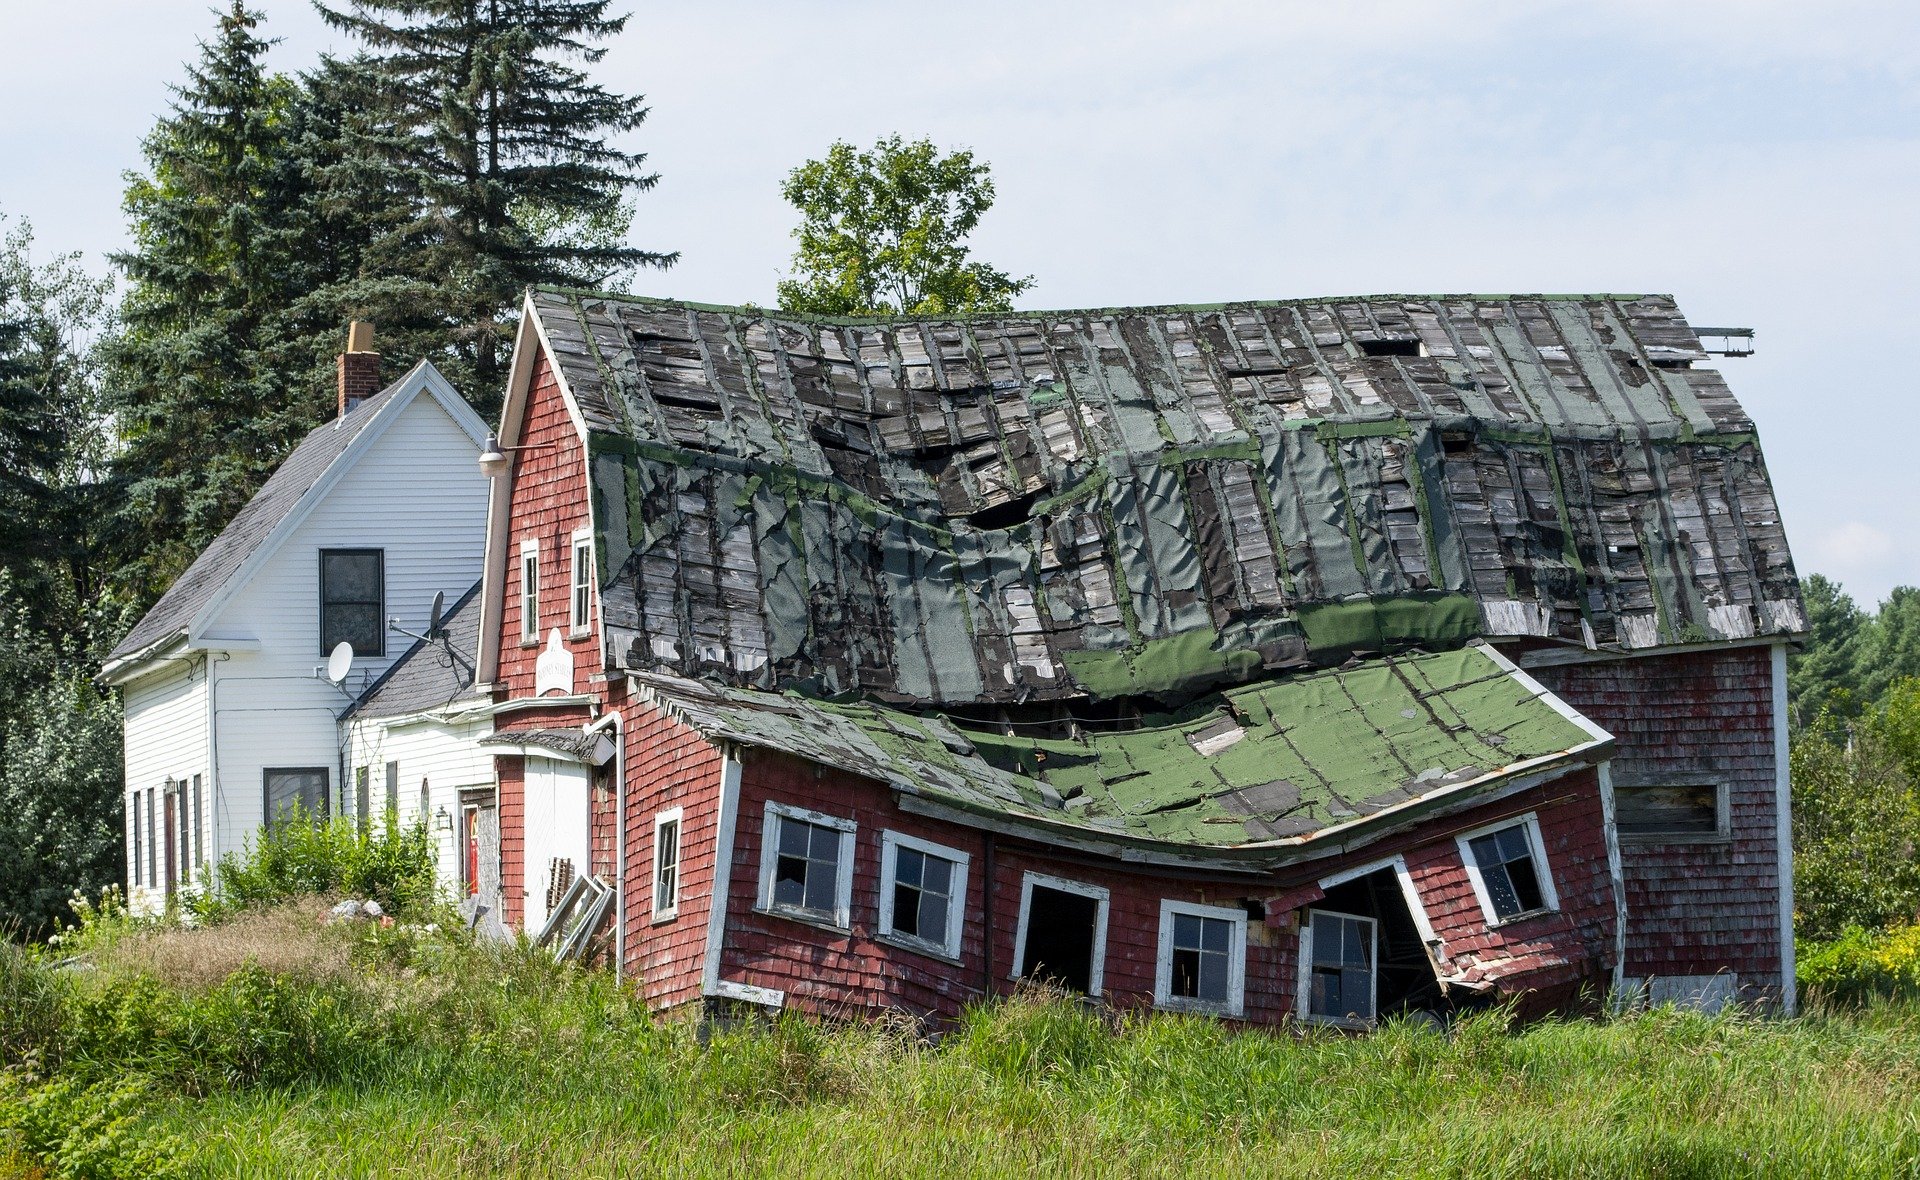 Pictured - Collapsed house with a pitched roof | Source: Pixabay